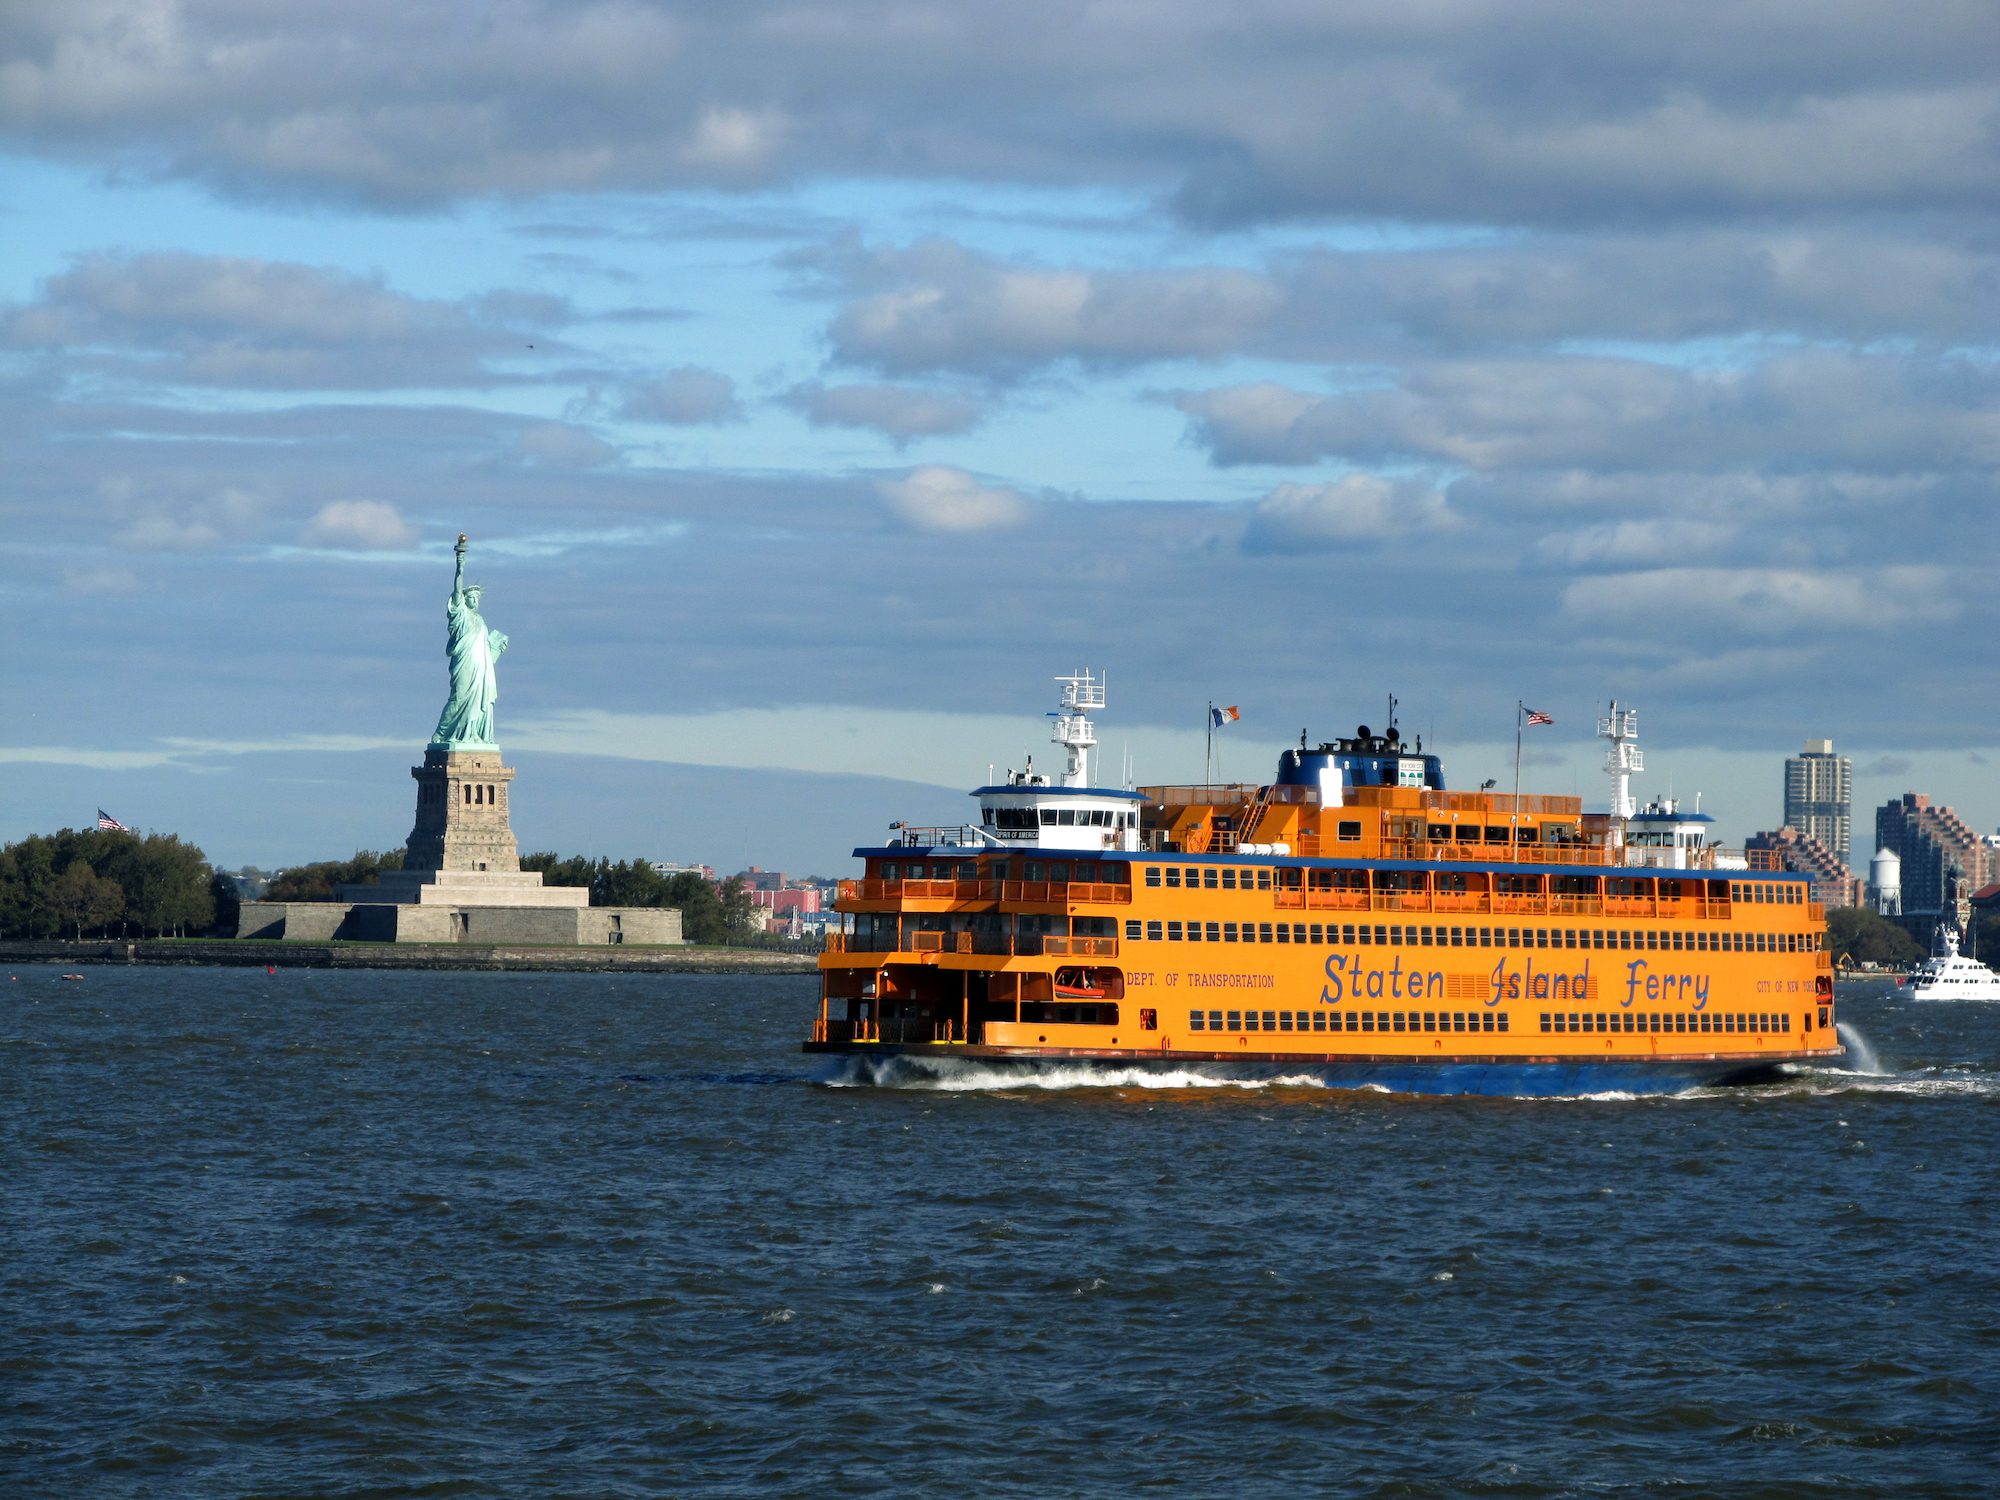 A Staten Island Ferry passes the Statue of Liberty in New York Harbor